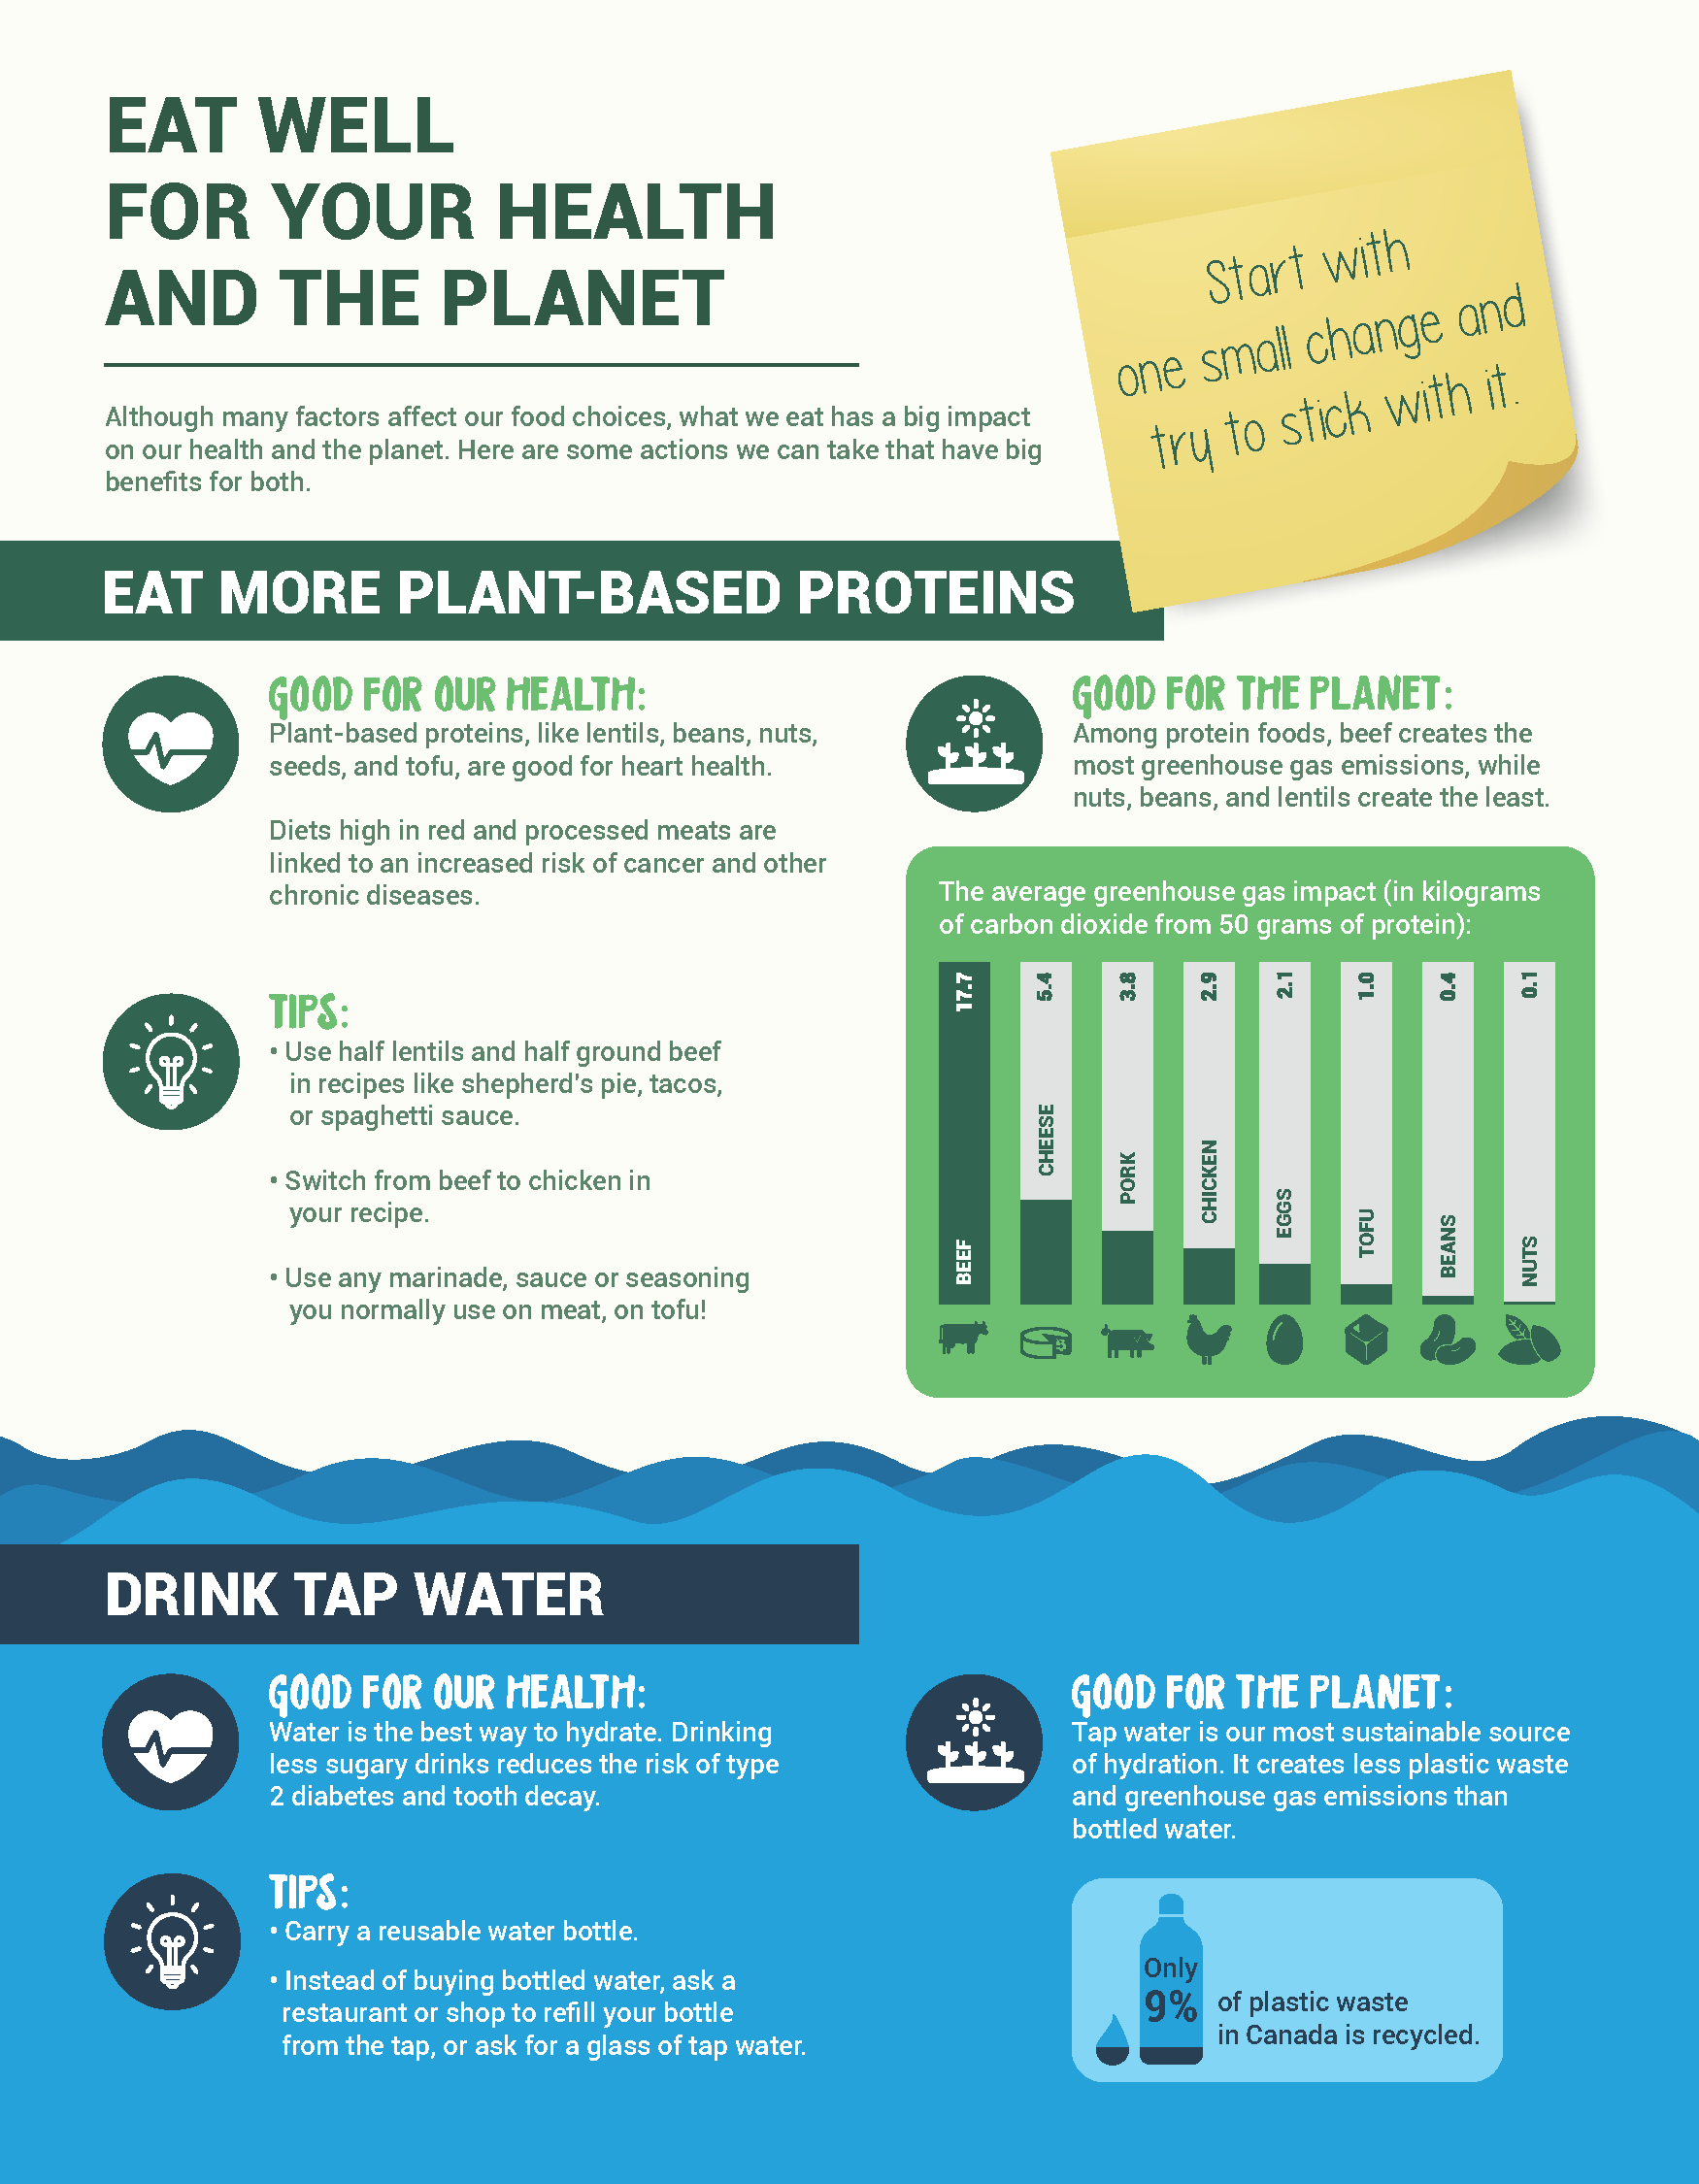 Image with tips for environmentally conscious eating